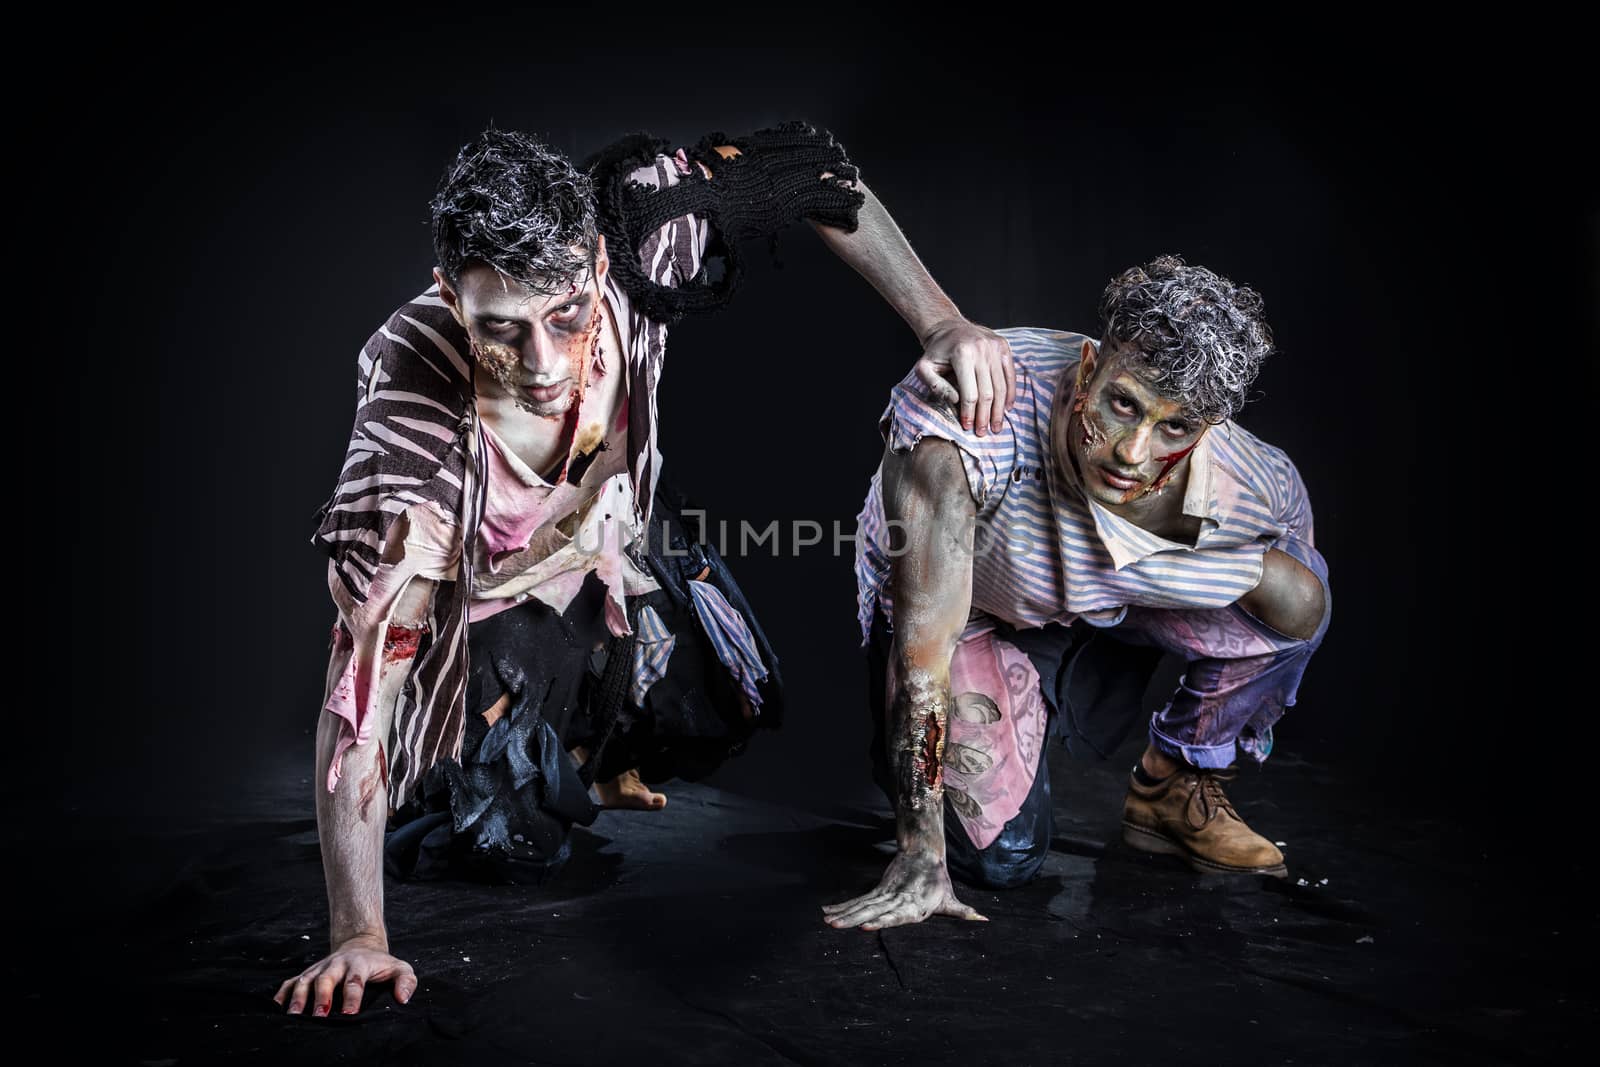 Two male zombies crawling on their knees, on black smoky background, looking at camera. Halloween theme